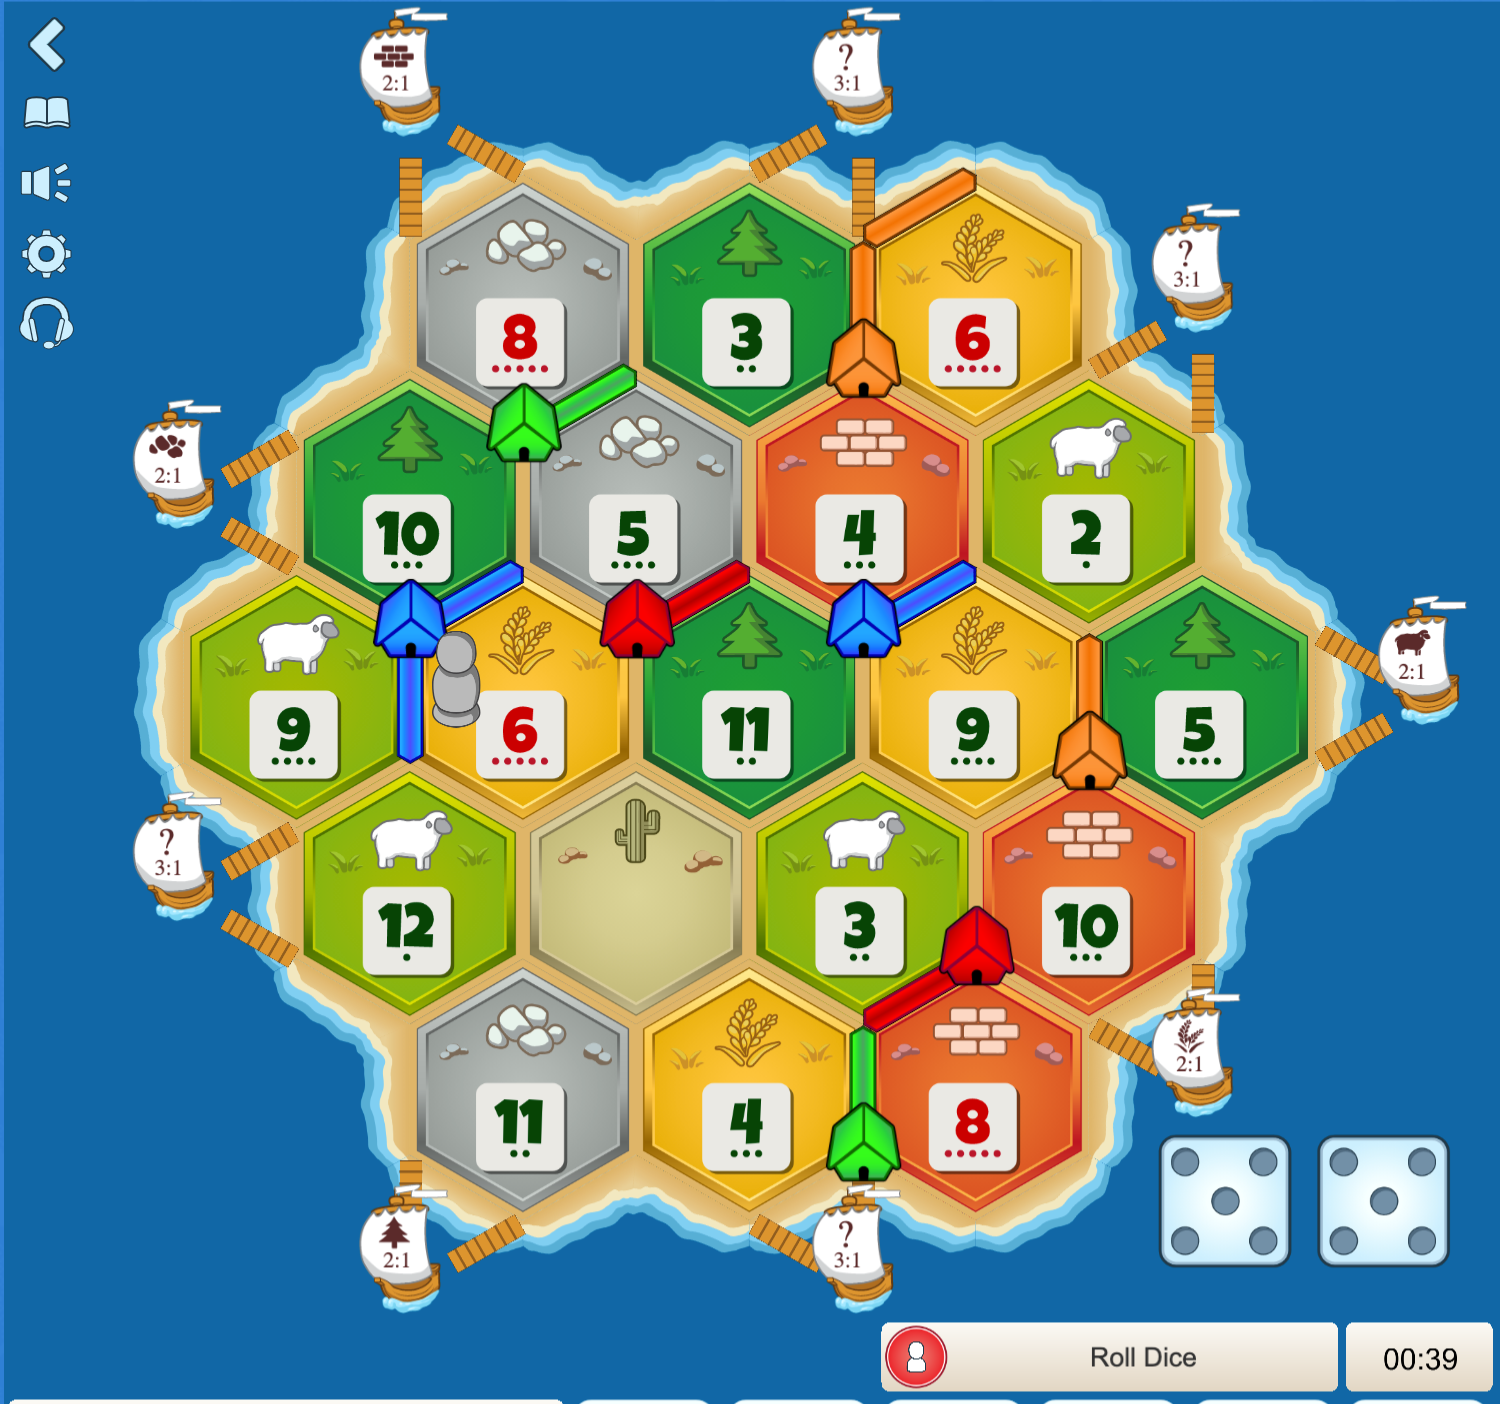 Best Sites to Play Catan Online